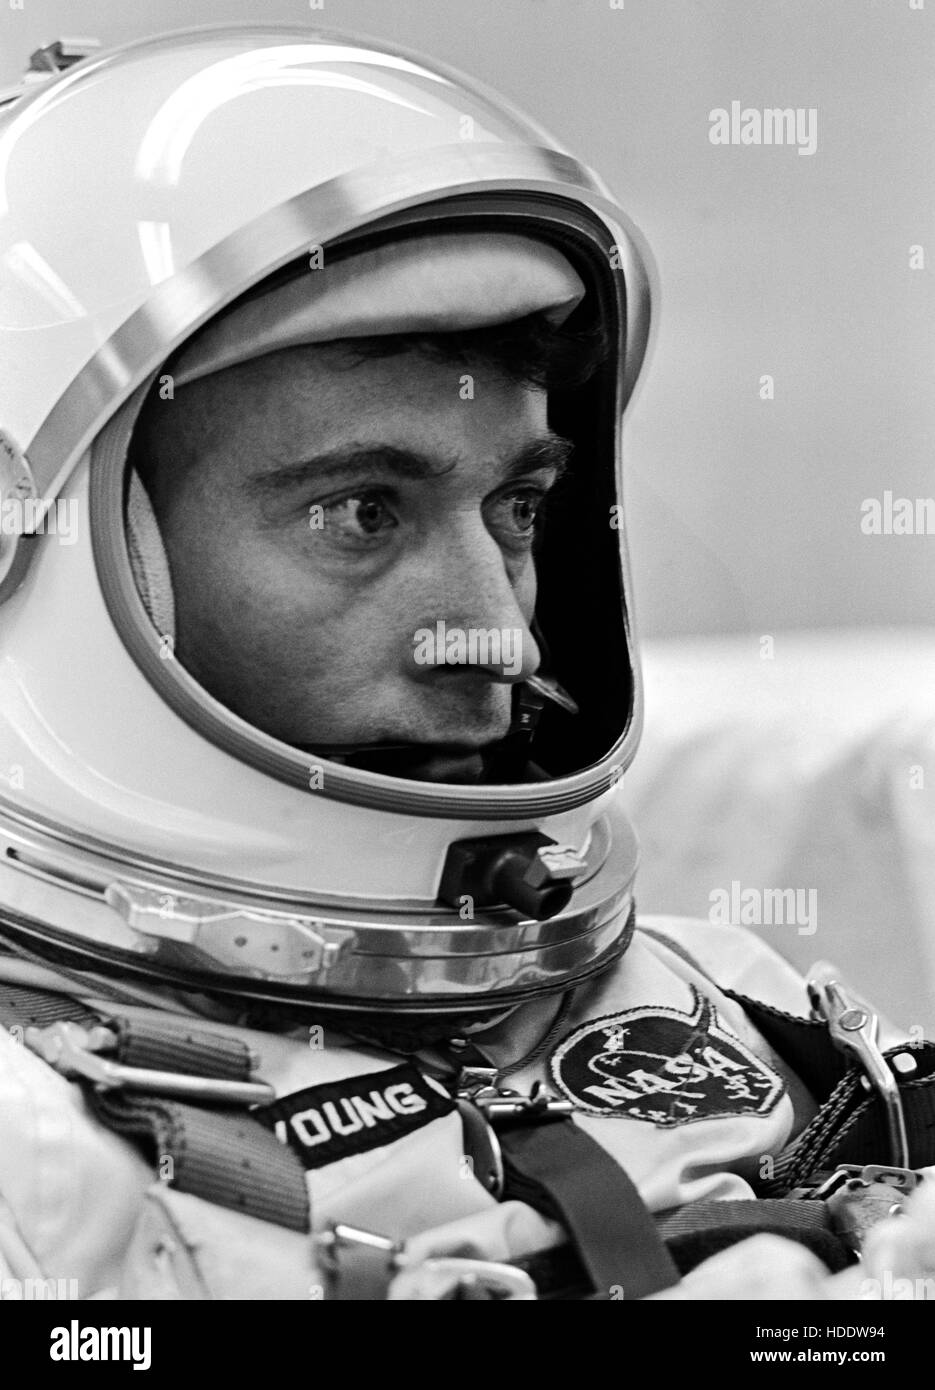 NASA Gemini-Titan 3 prime crew astronaut John Young prepares for the Gemini-Titan 3 spacecraft launch at the Cape Canaveral Air Force Station March 23, 1965 in Cape Canaveral, Florida. Stock Photo